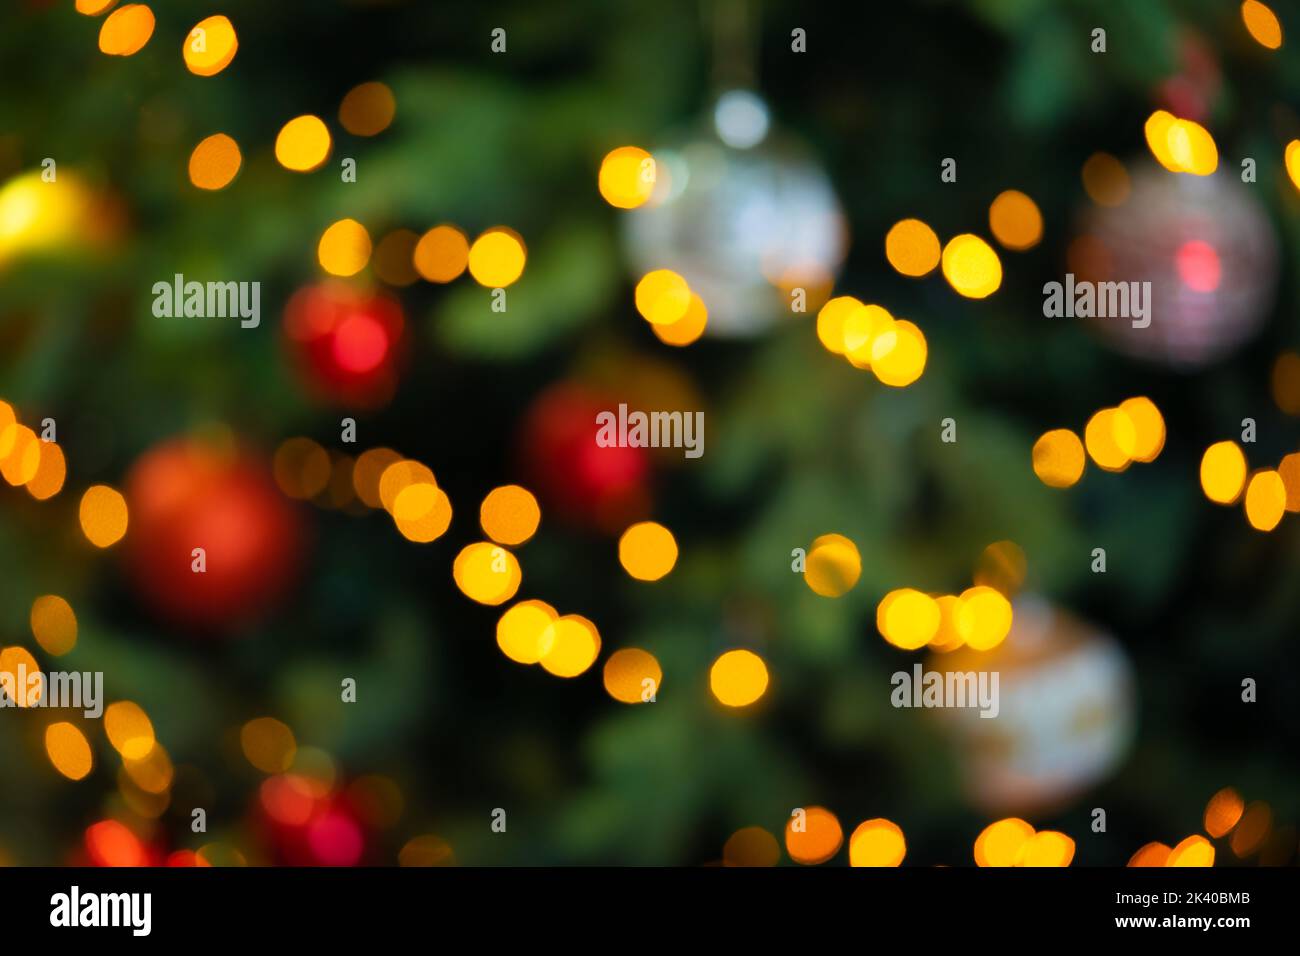 Blurred Christmas tree lights. Abstract background. Stock Photo